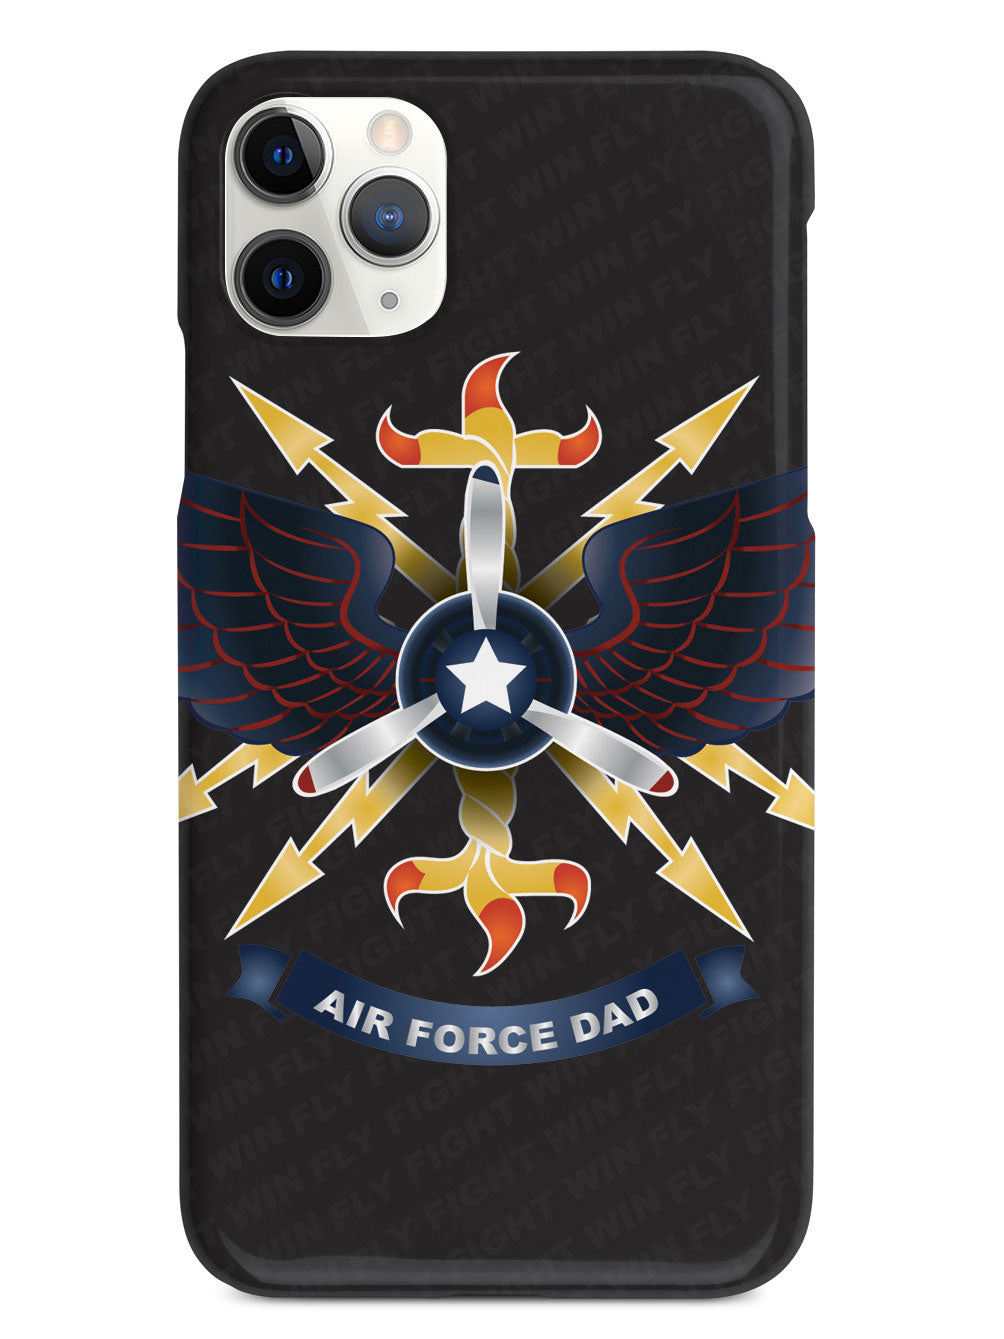 Air Force Dad Case